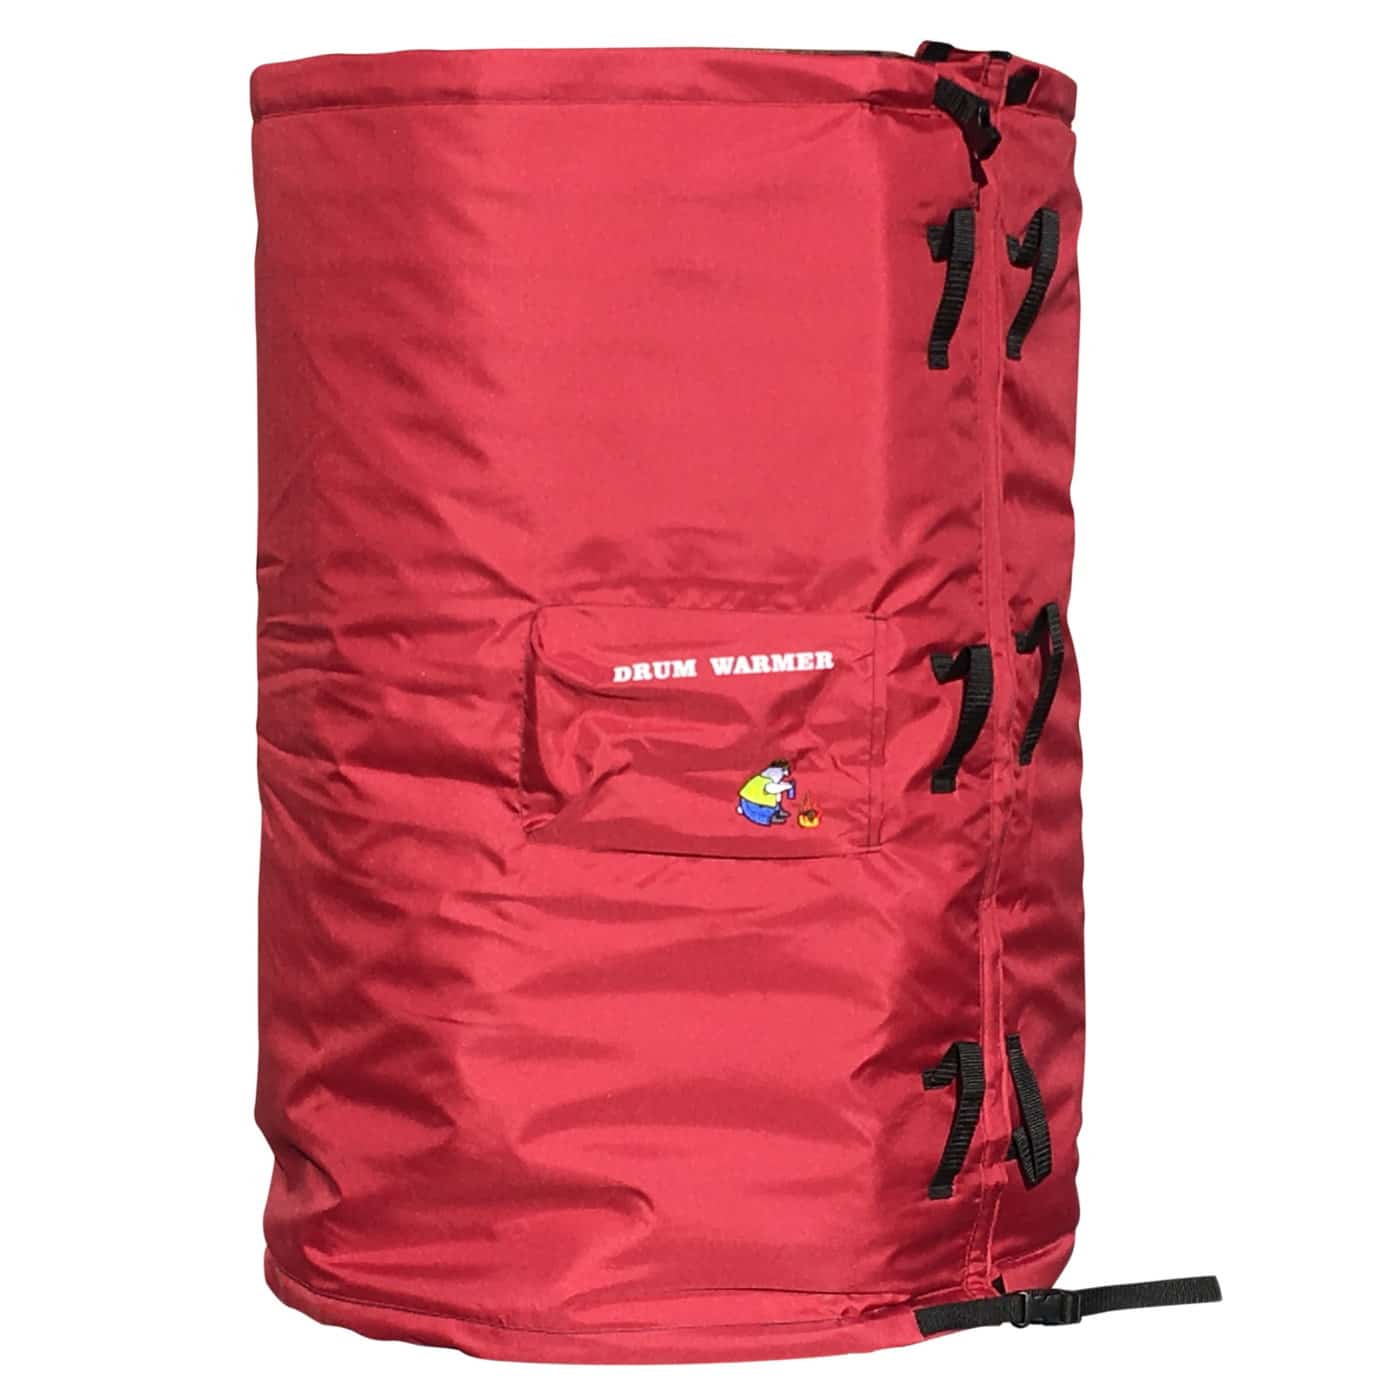 55 Gallon Drum Heating Warming Wrap w- 2 Temperature Settings - JAAGS